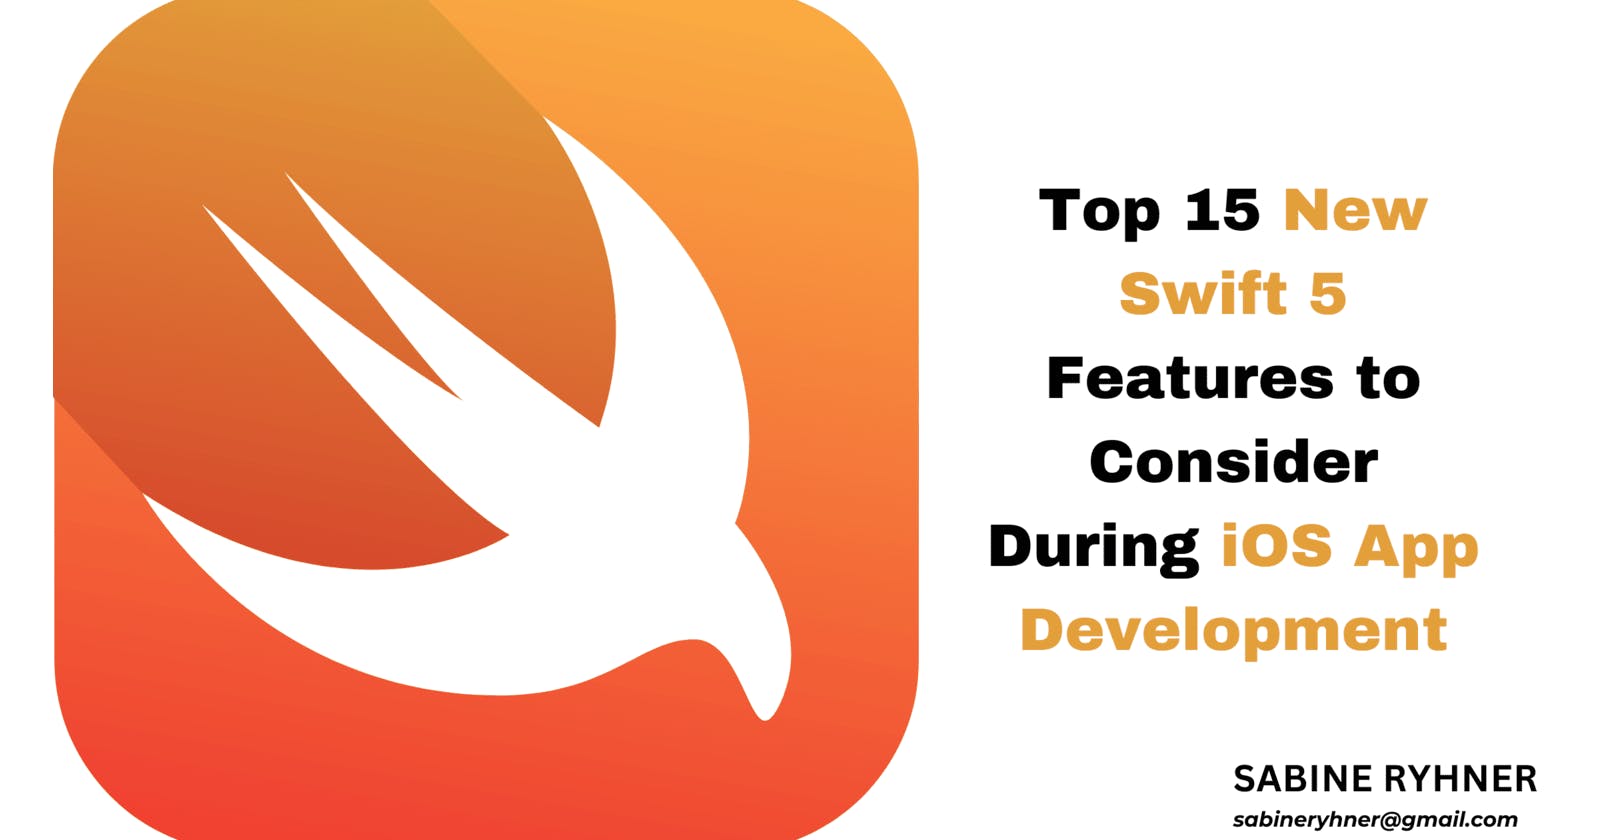 New Swift 5 Features to Consider During iOS App Development